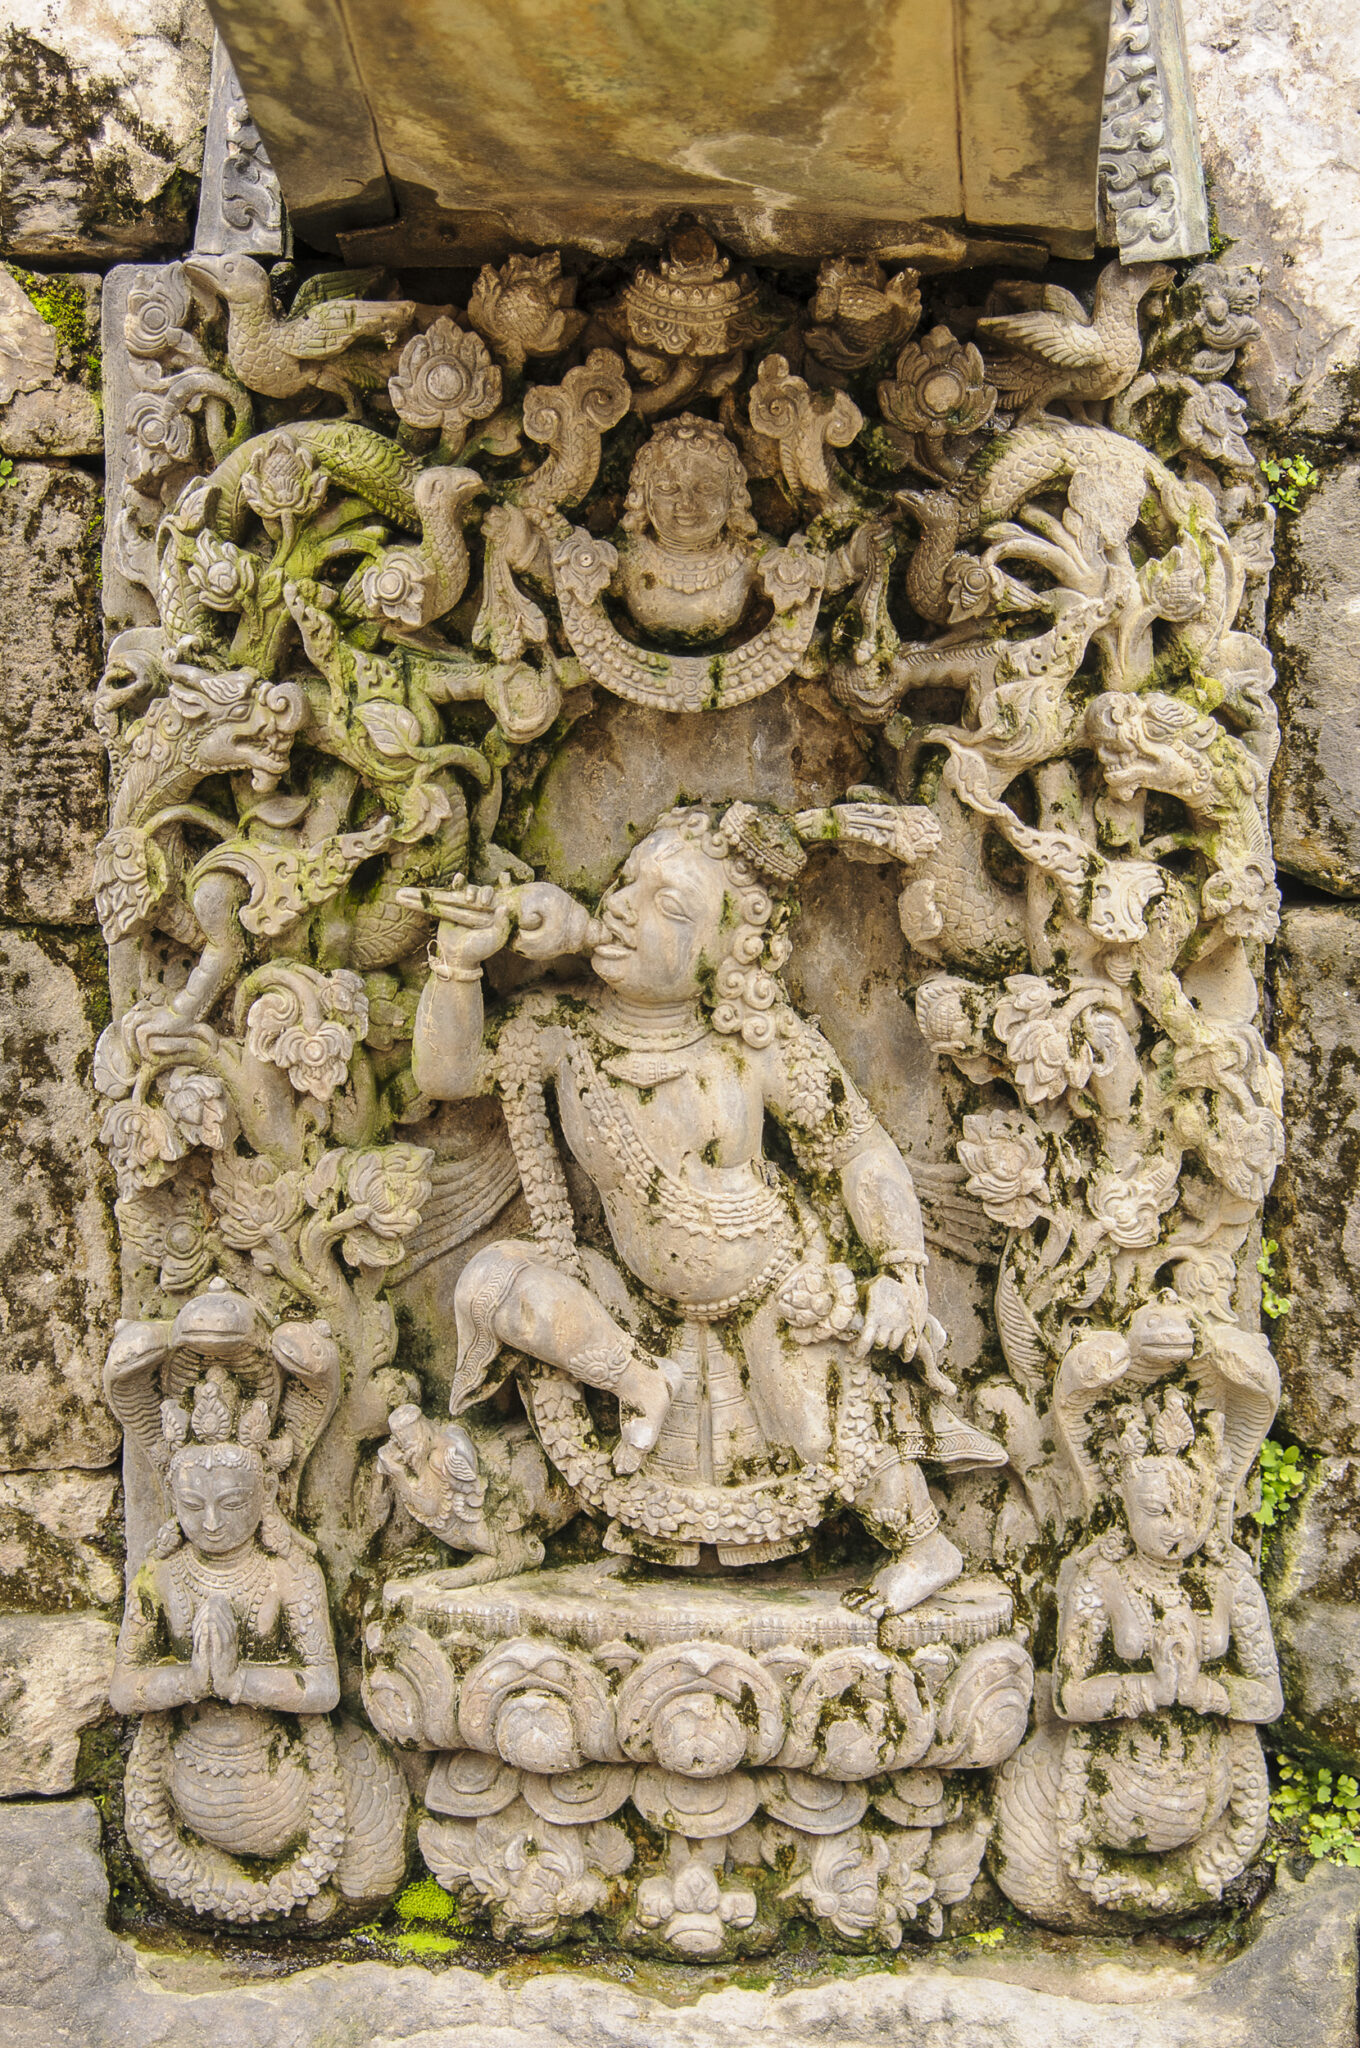 Relief sculpture depicting prince holding conch shell to mouth amidst twisting vines, blossoms, and deities